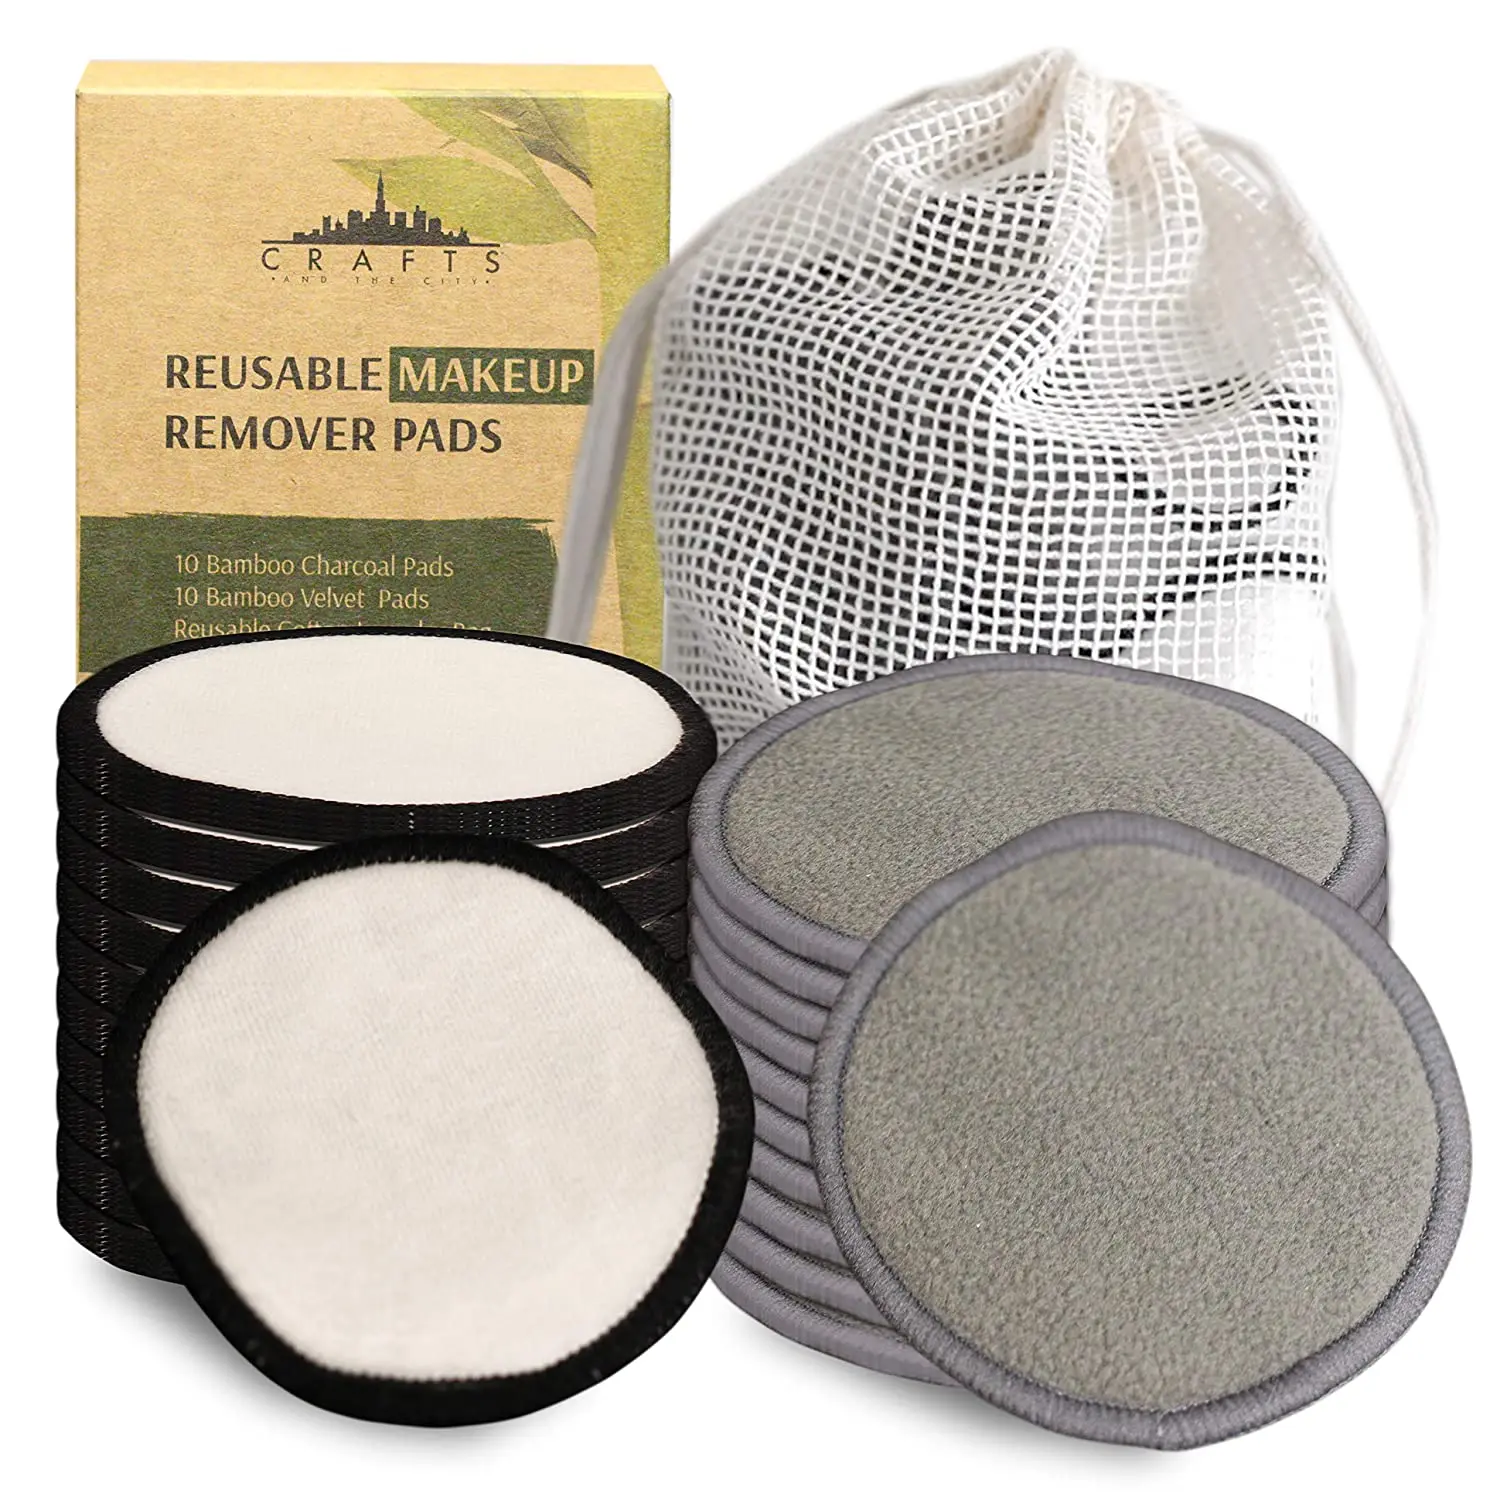 

Zero waste Rounds Washable Bamboo Reusable Organic Cotton Pads Face Makeup Remover Pads Cleaning Facial Make Up Pad